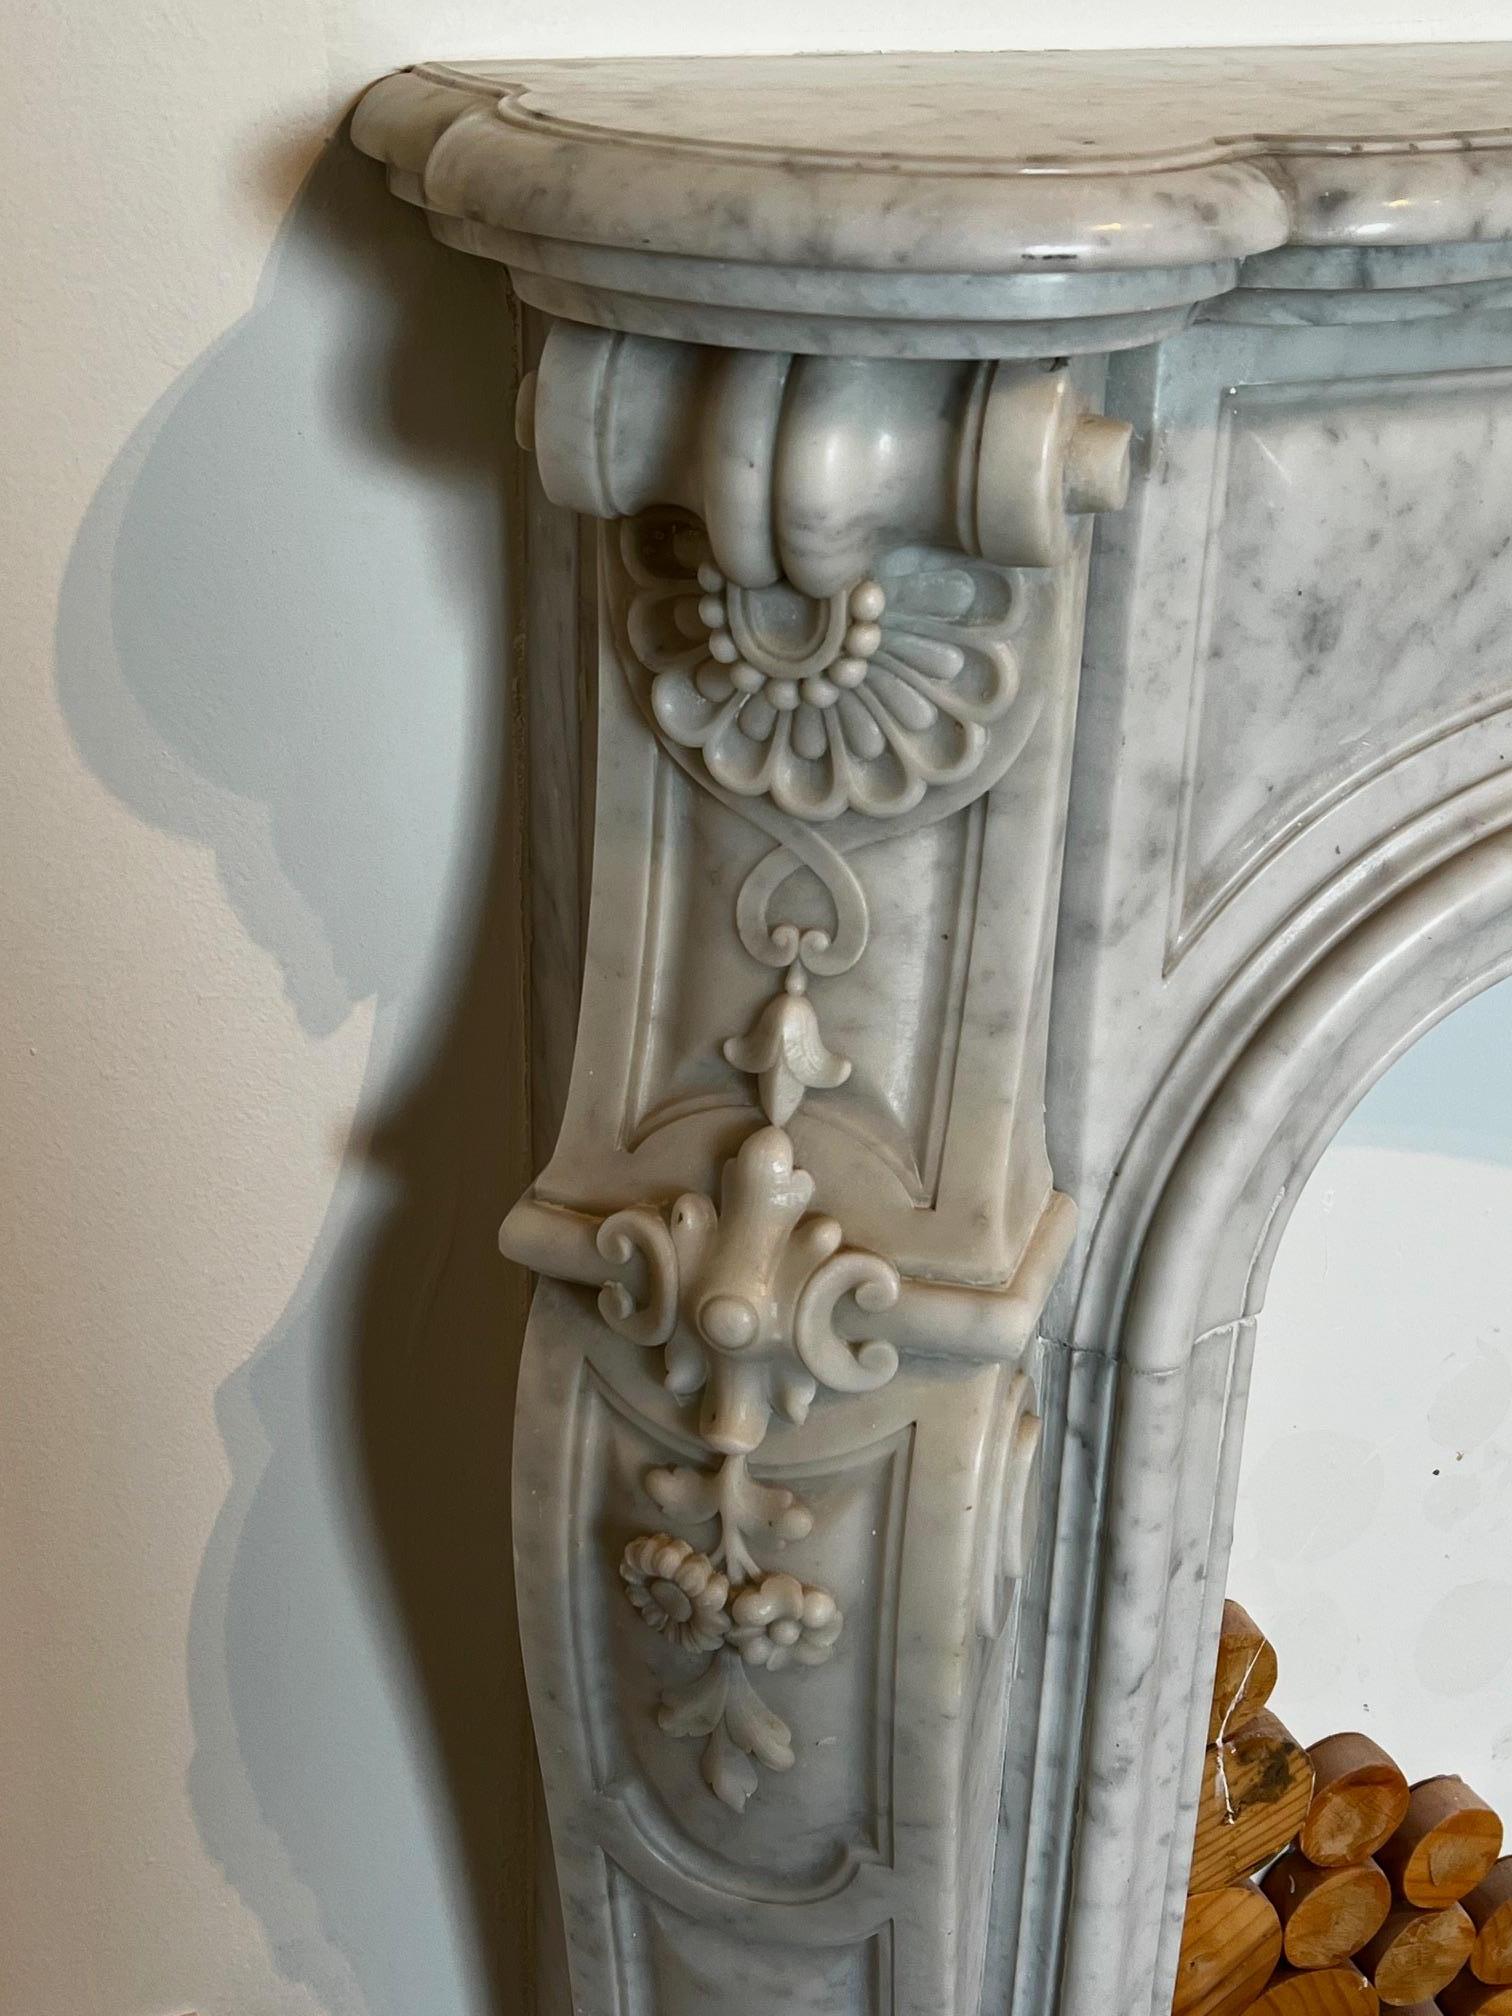 This beautifully ornate fireplace, hand-carved in the Louis XV style, is made from semi-polished White Carrara marble. It features delicately-carved floral details on both the lintel and the legs. Hand-carved shells are also featured in the center